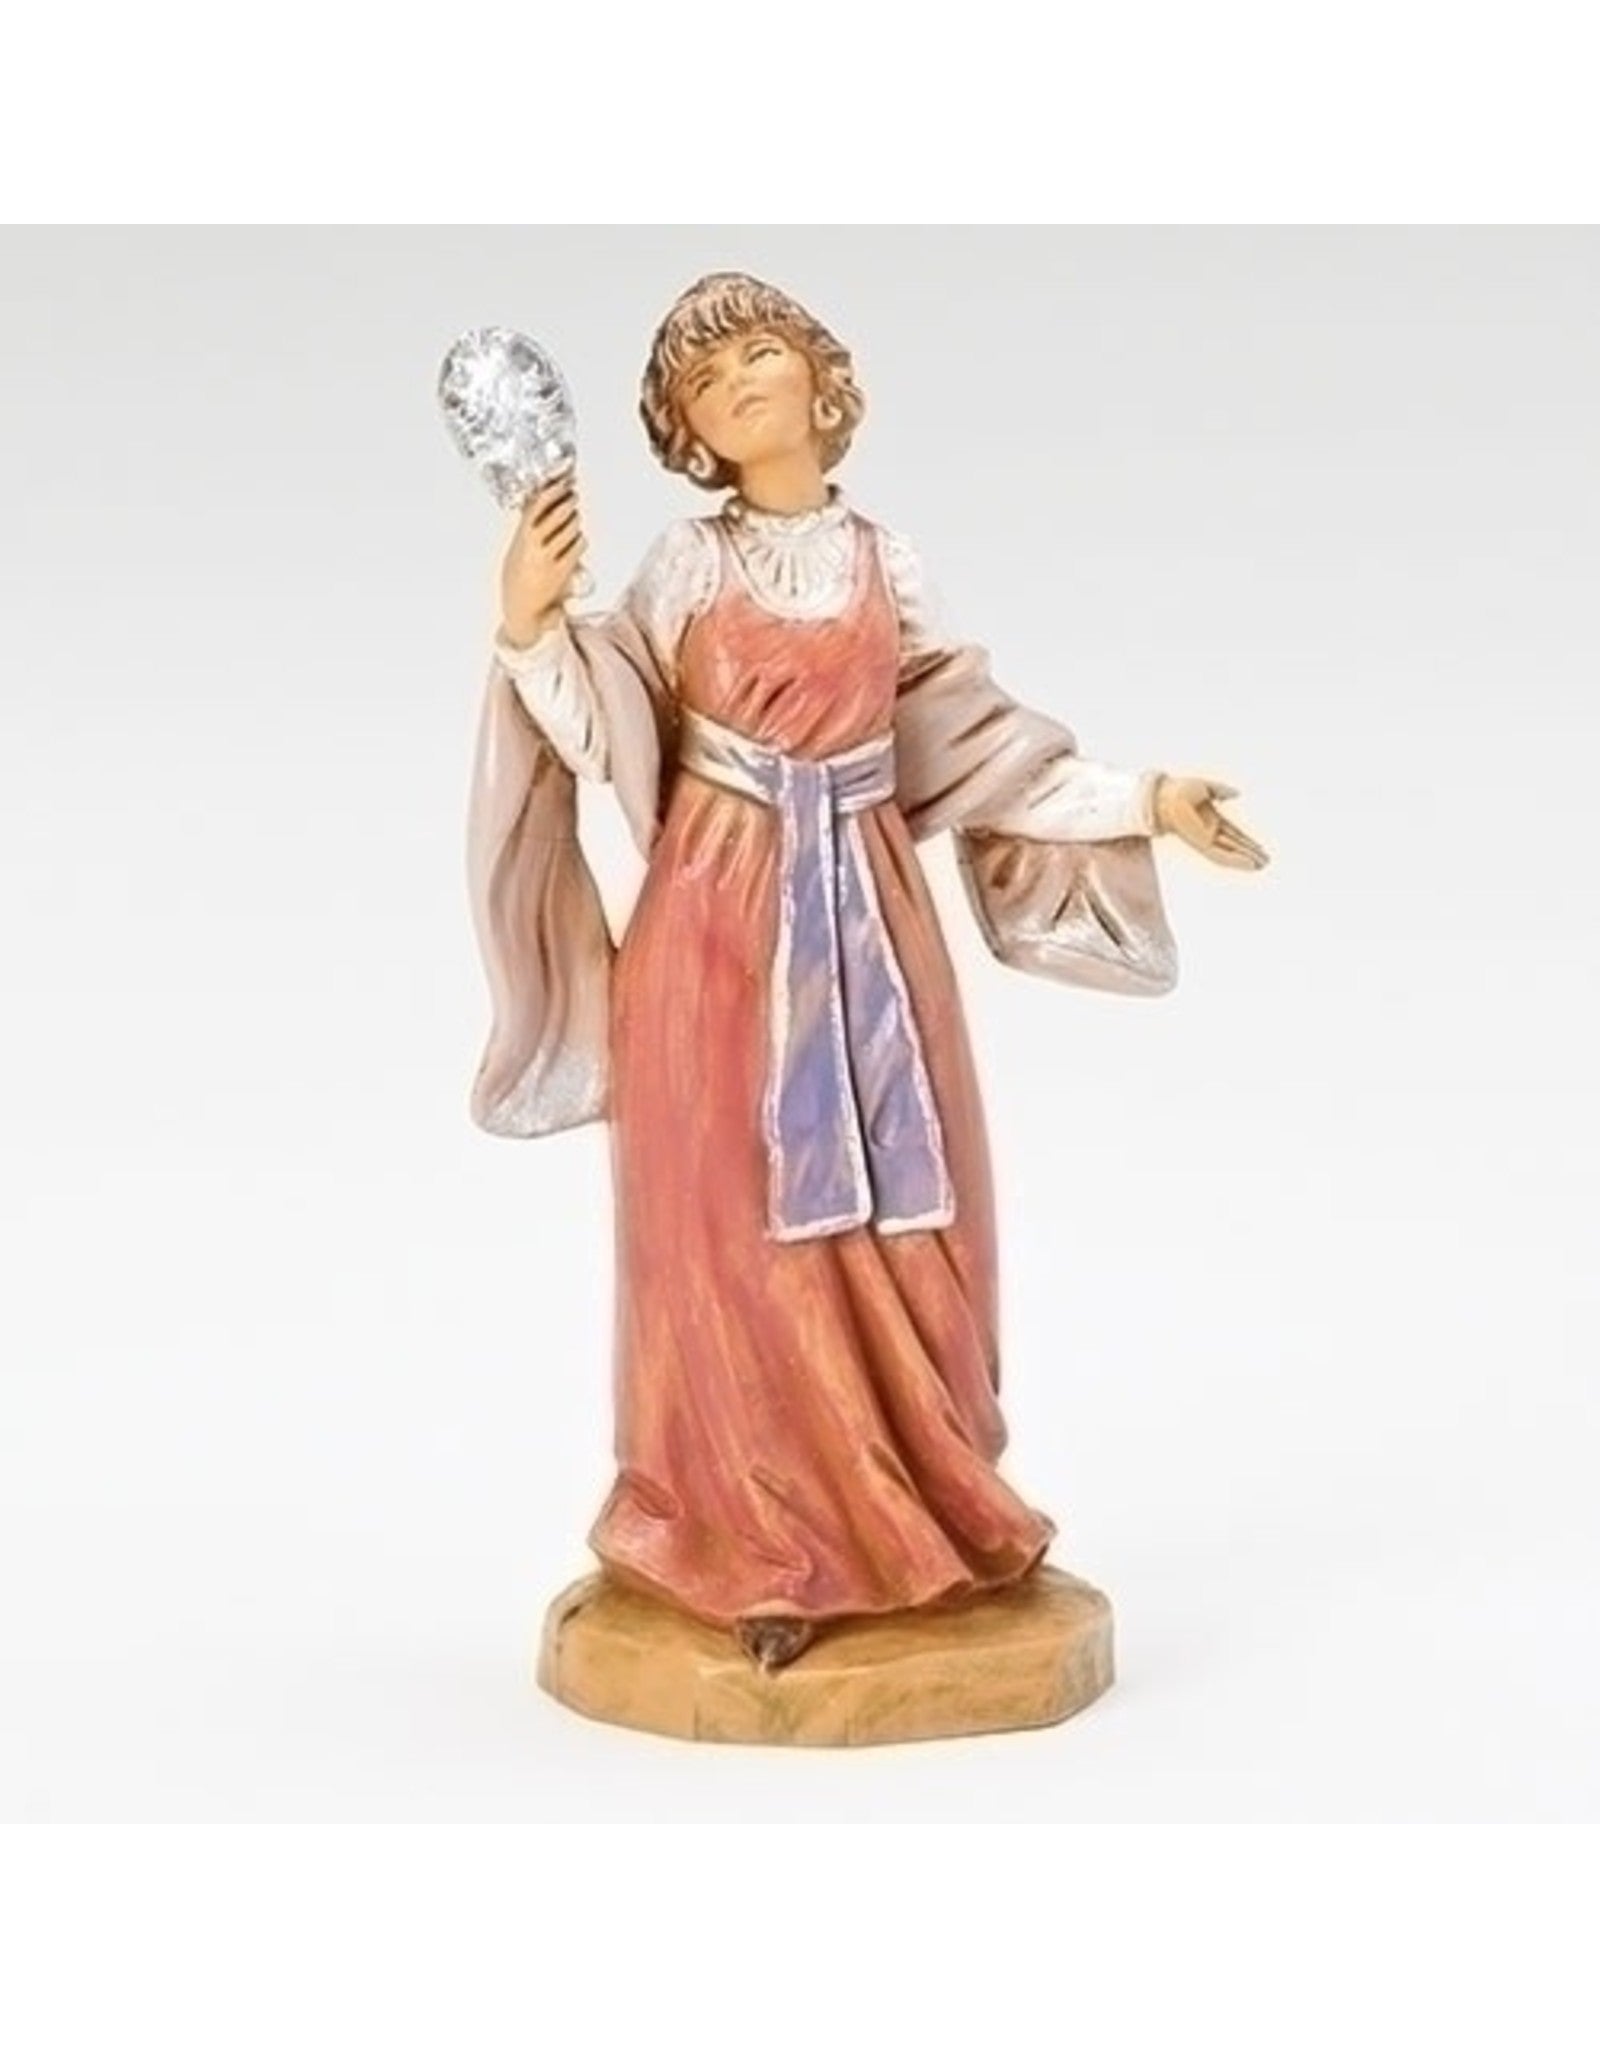 5" Daphne Limited Edition 2003 Jewelry Woman for The Fontanini Nativity Set